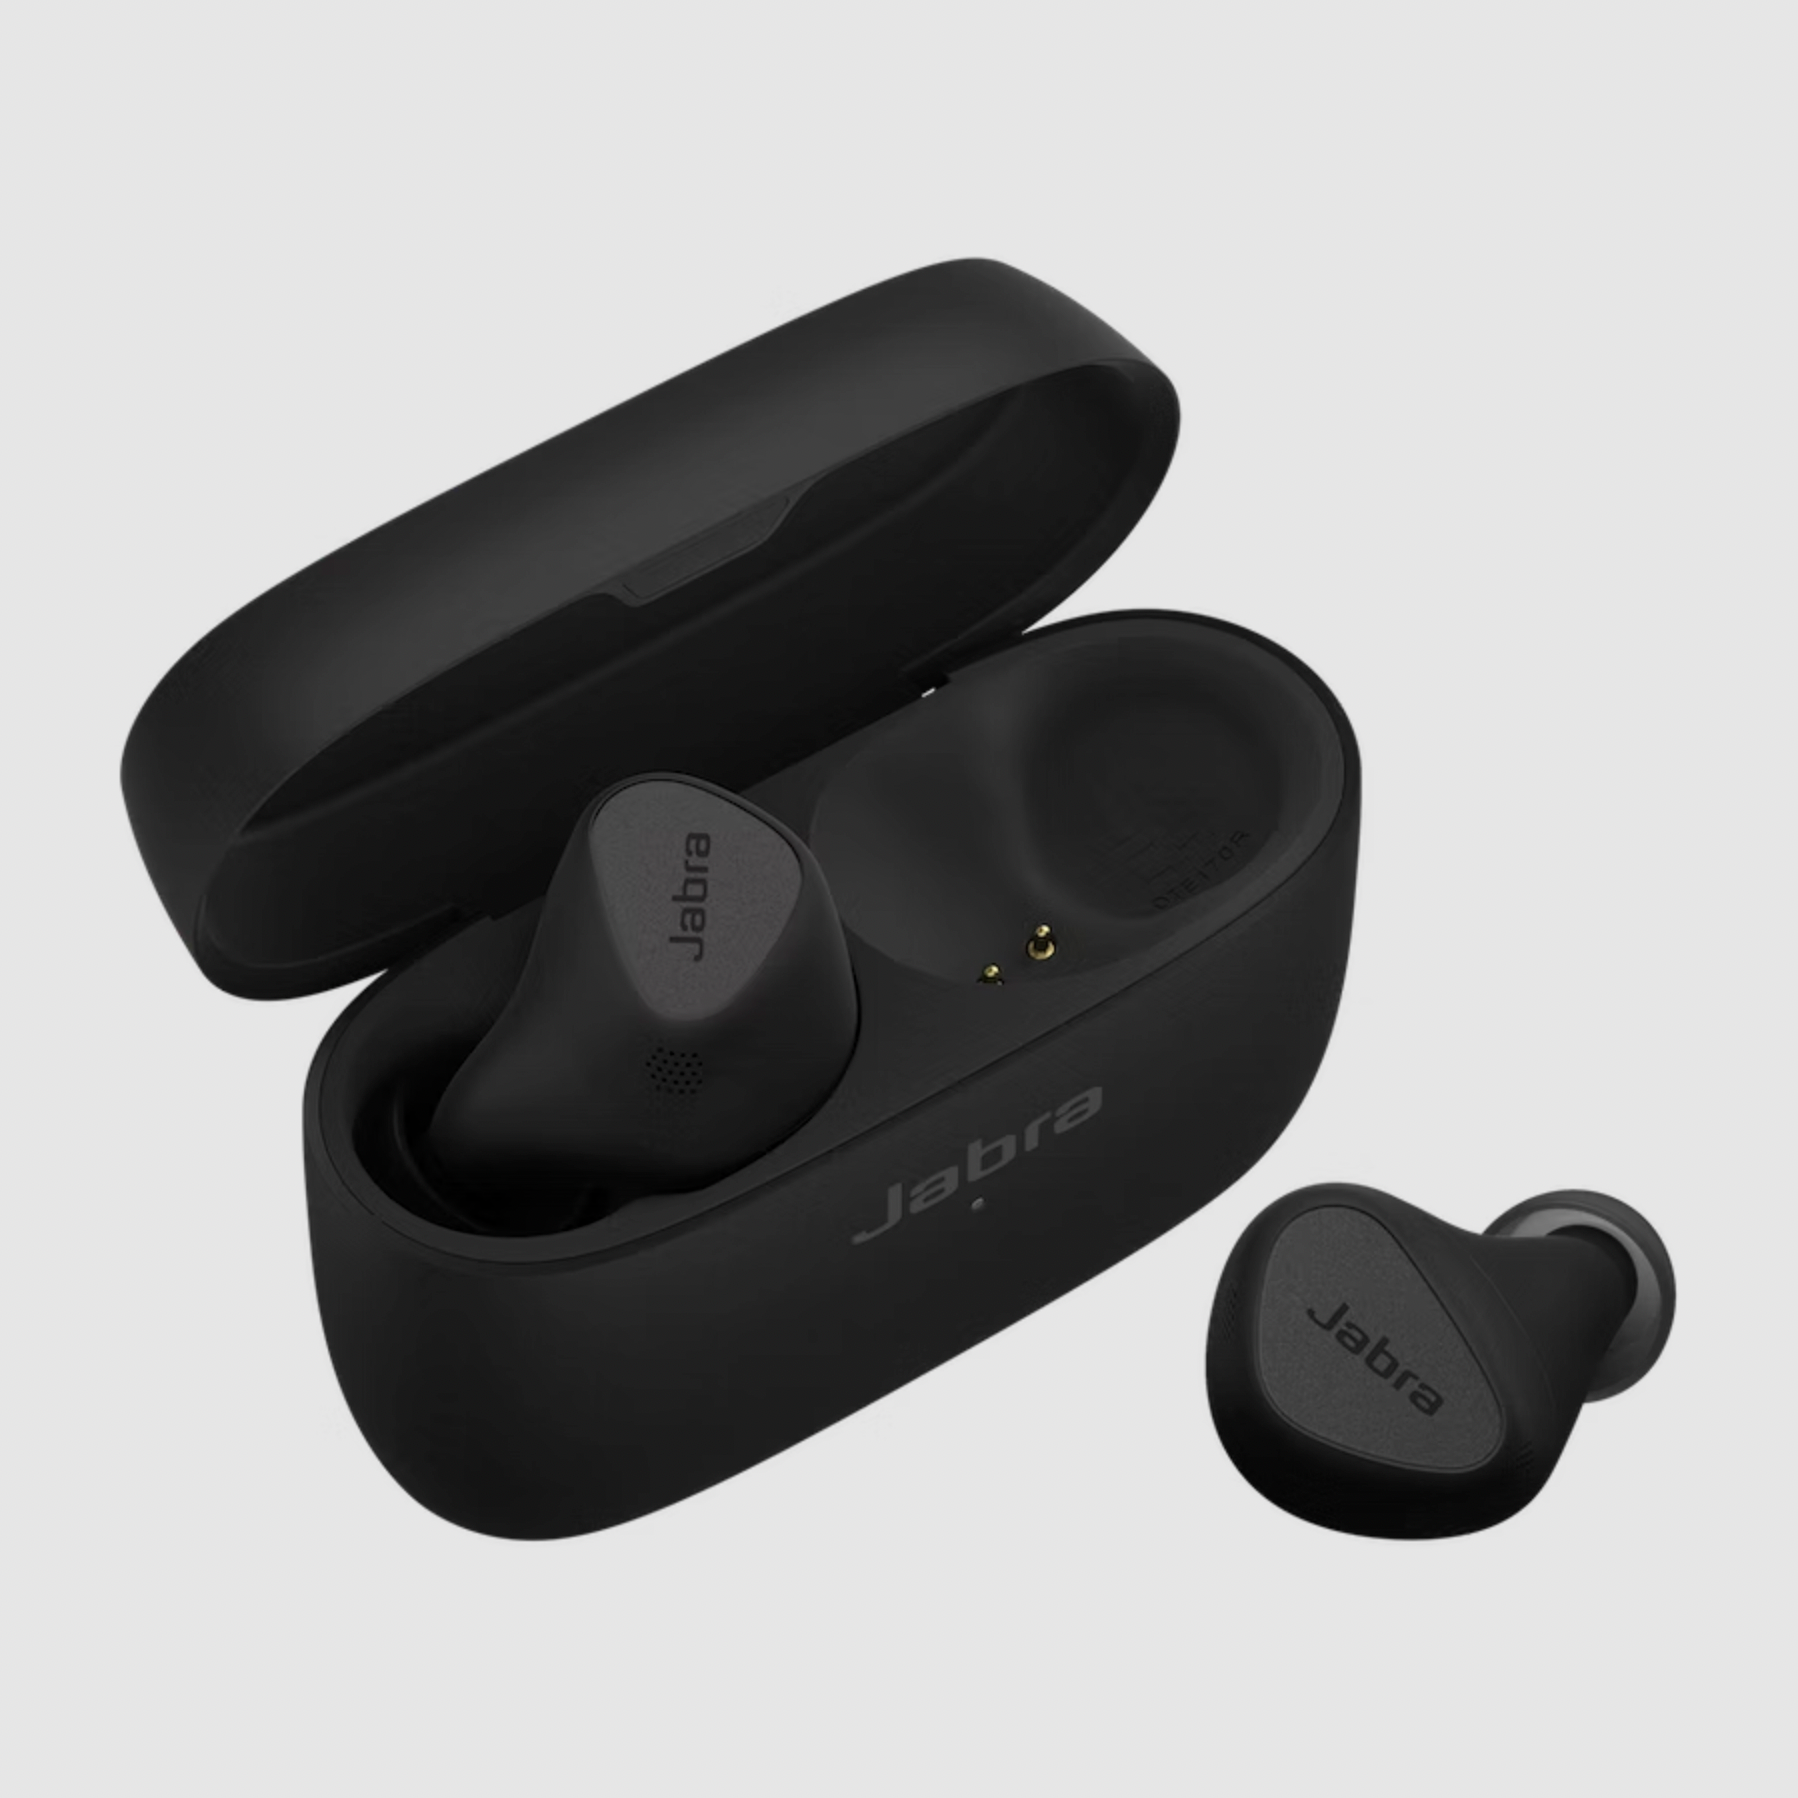 Jabra's new Elite 5 earbuds are featurerich and priced to move